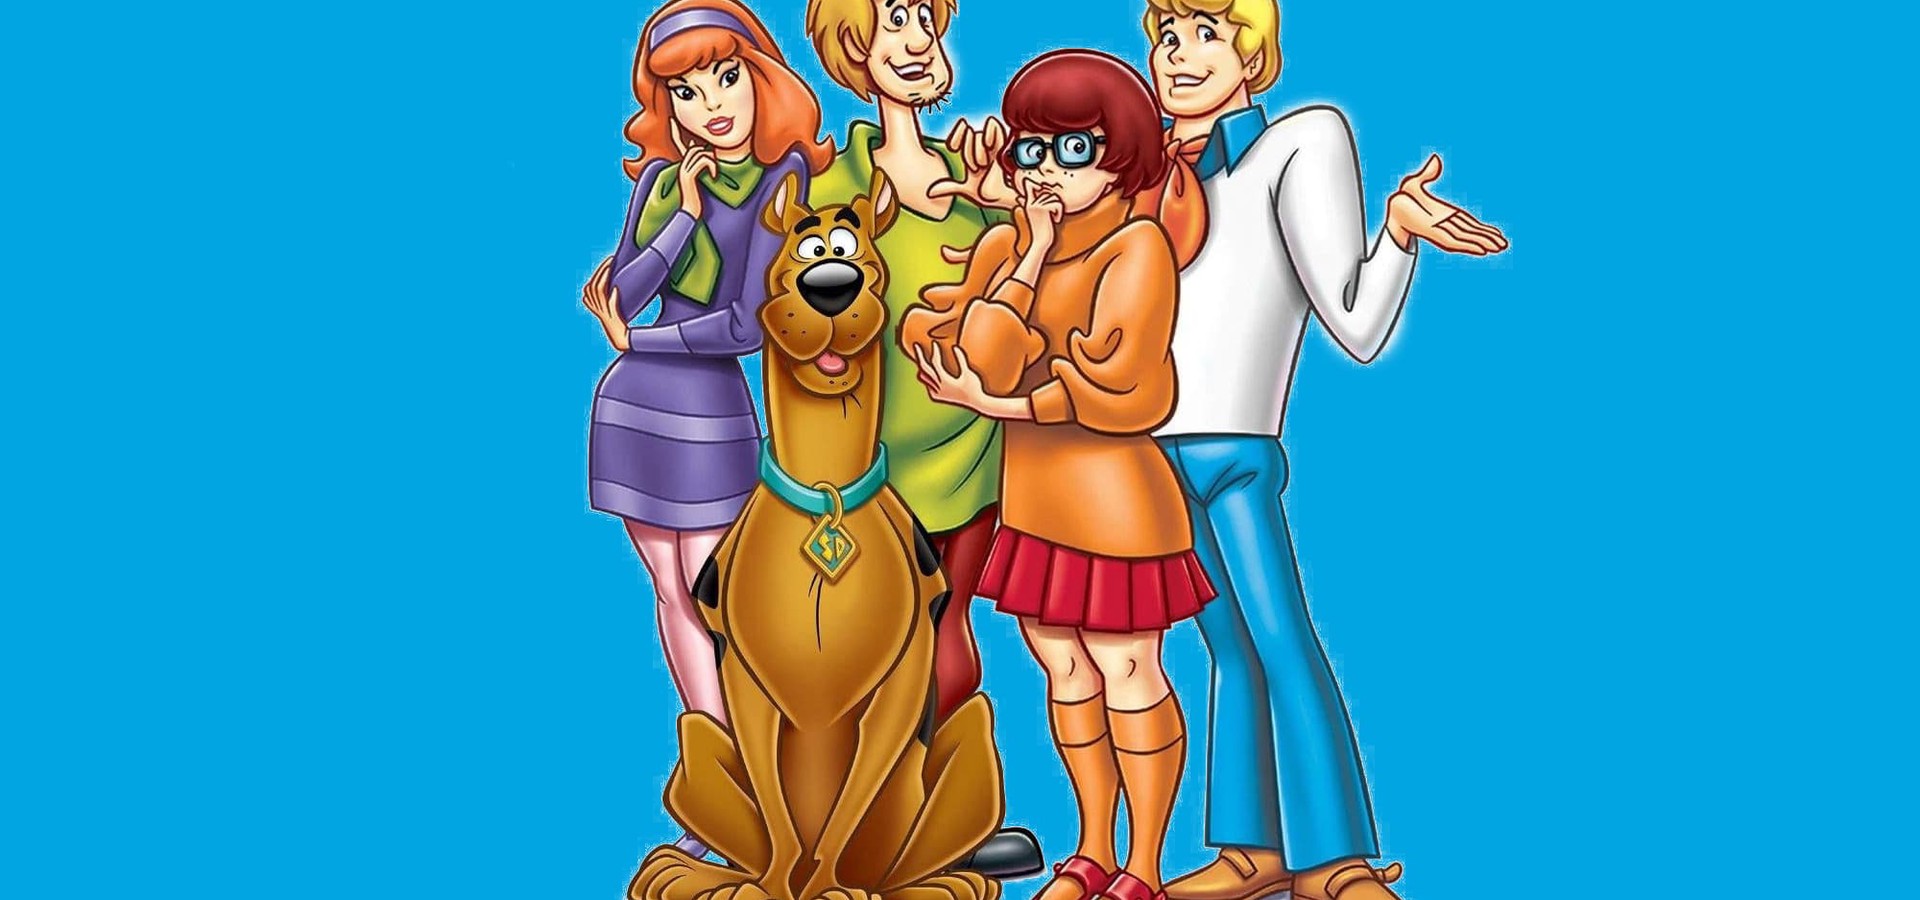 The New Scooby Doo Movies Streaming Online 